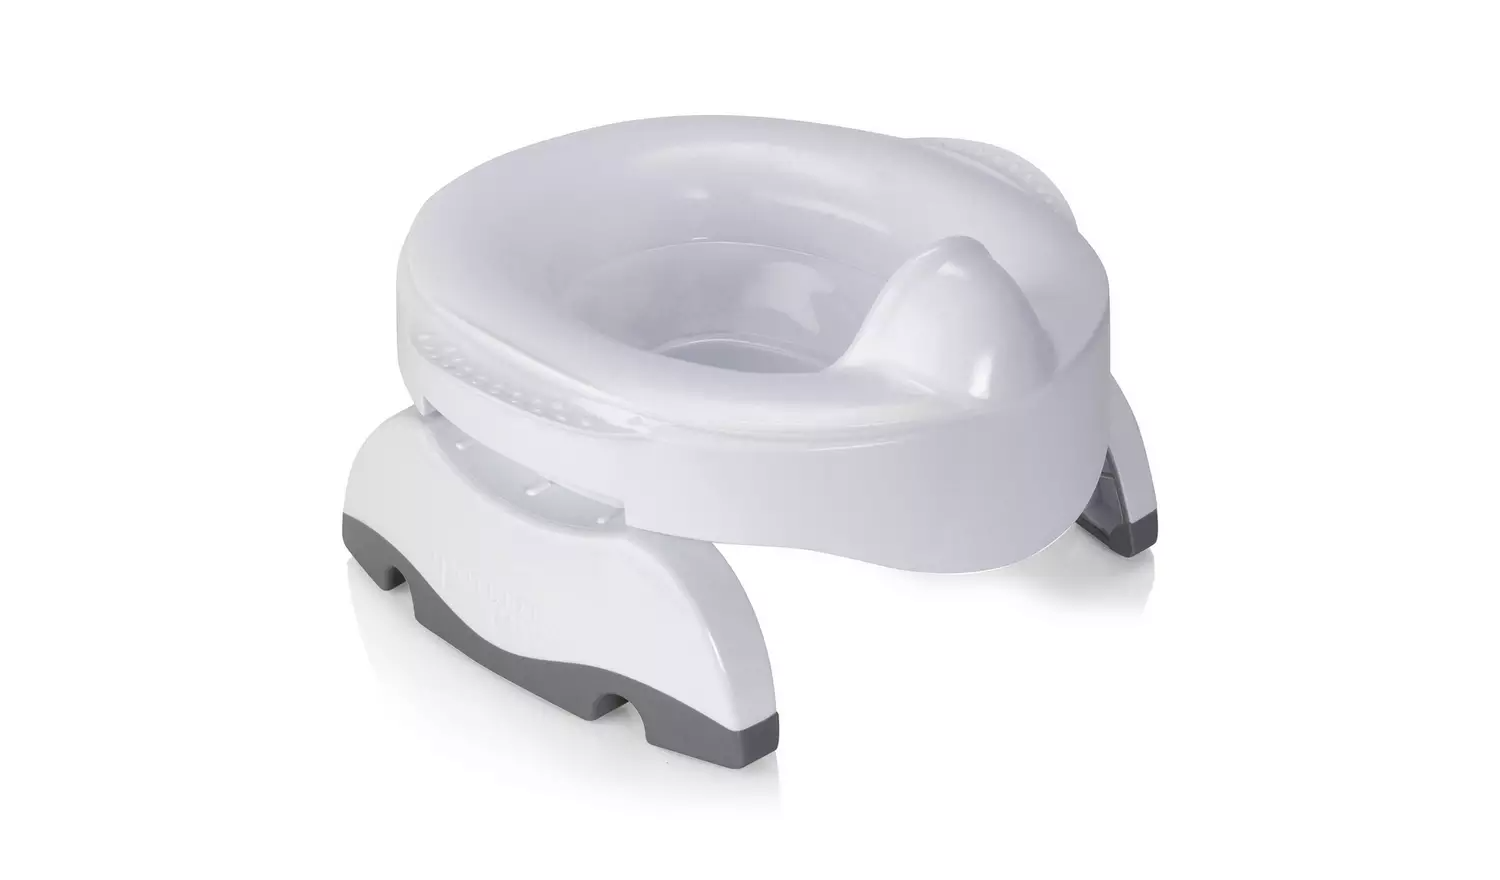 Potette Max Portable Potty & Toilet Trainer Seat with Liners